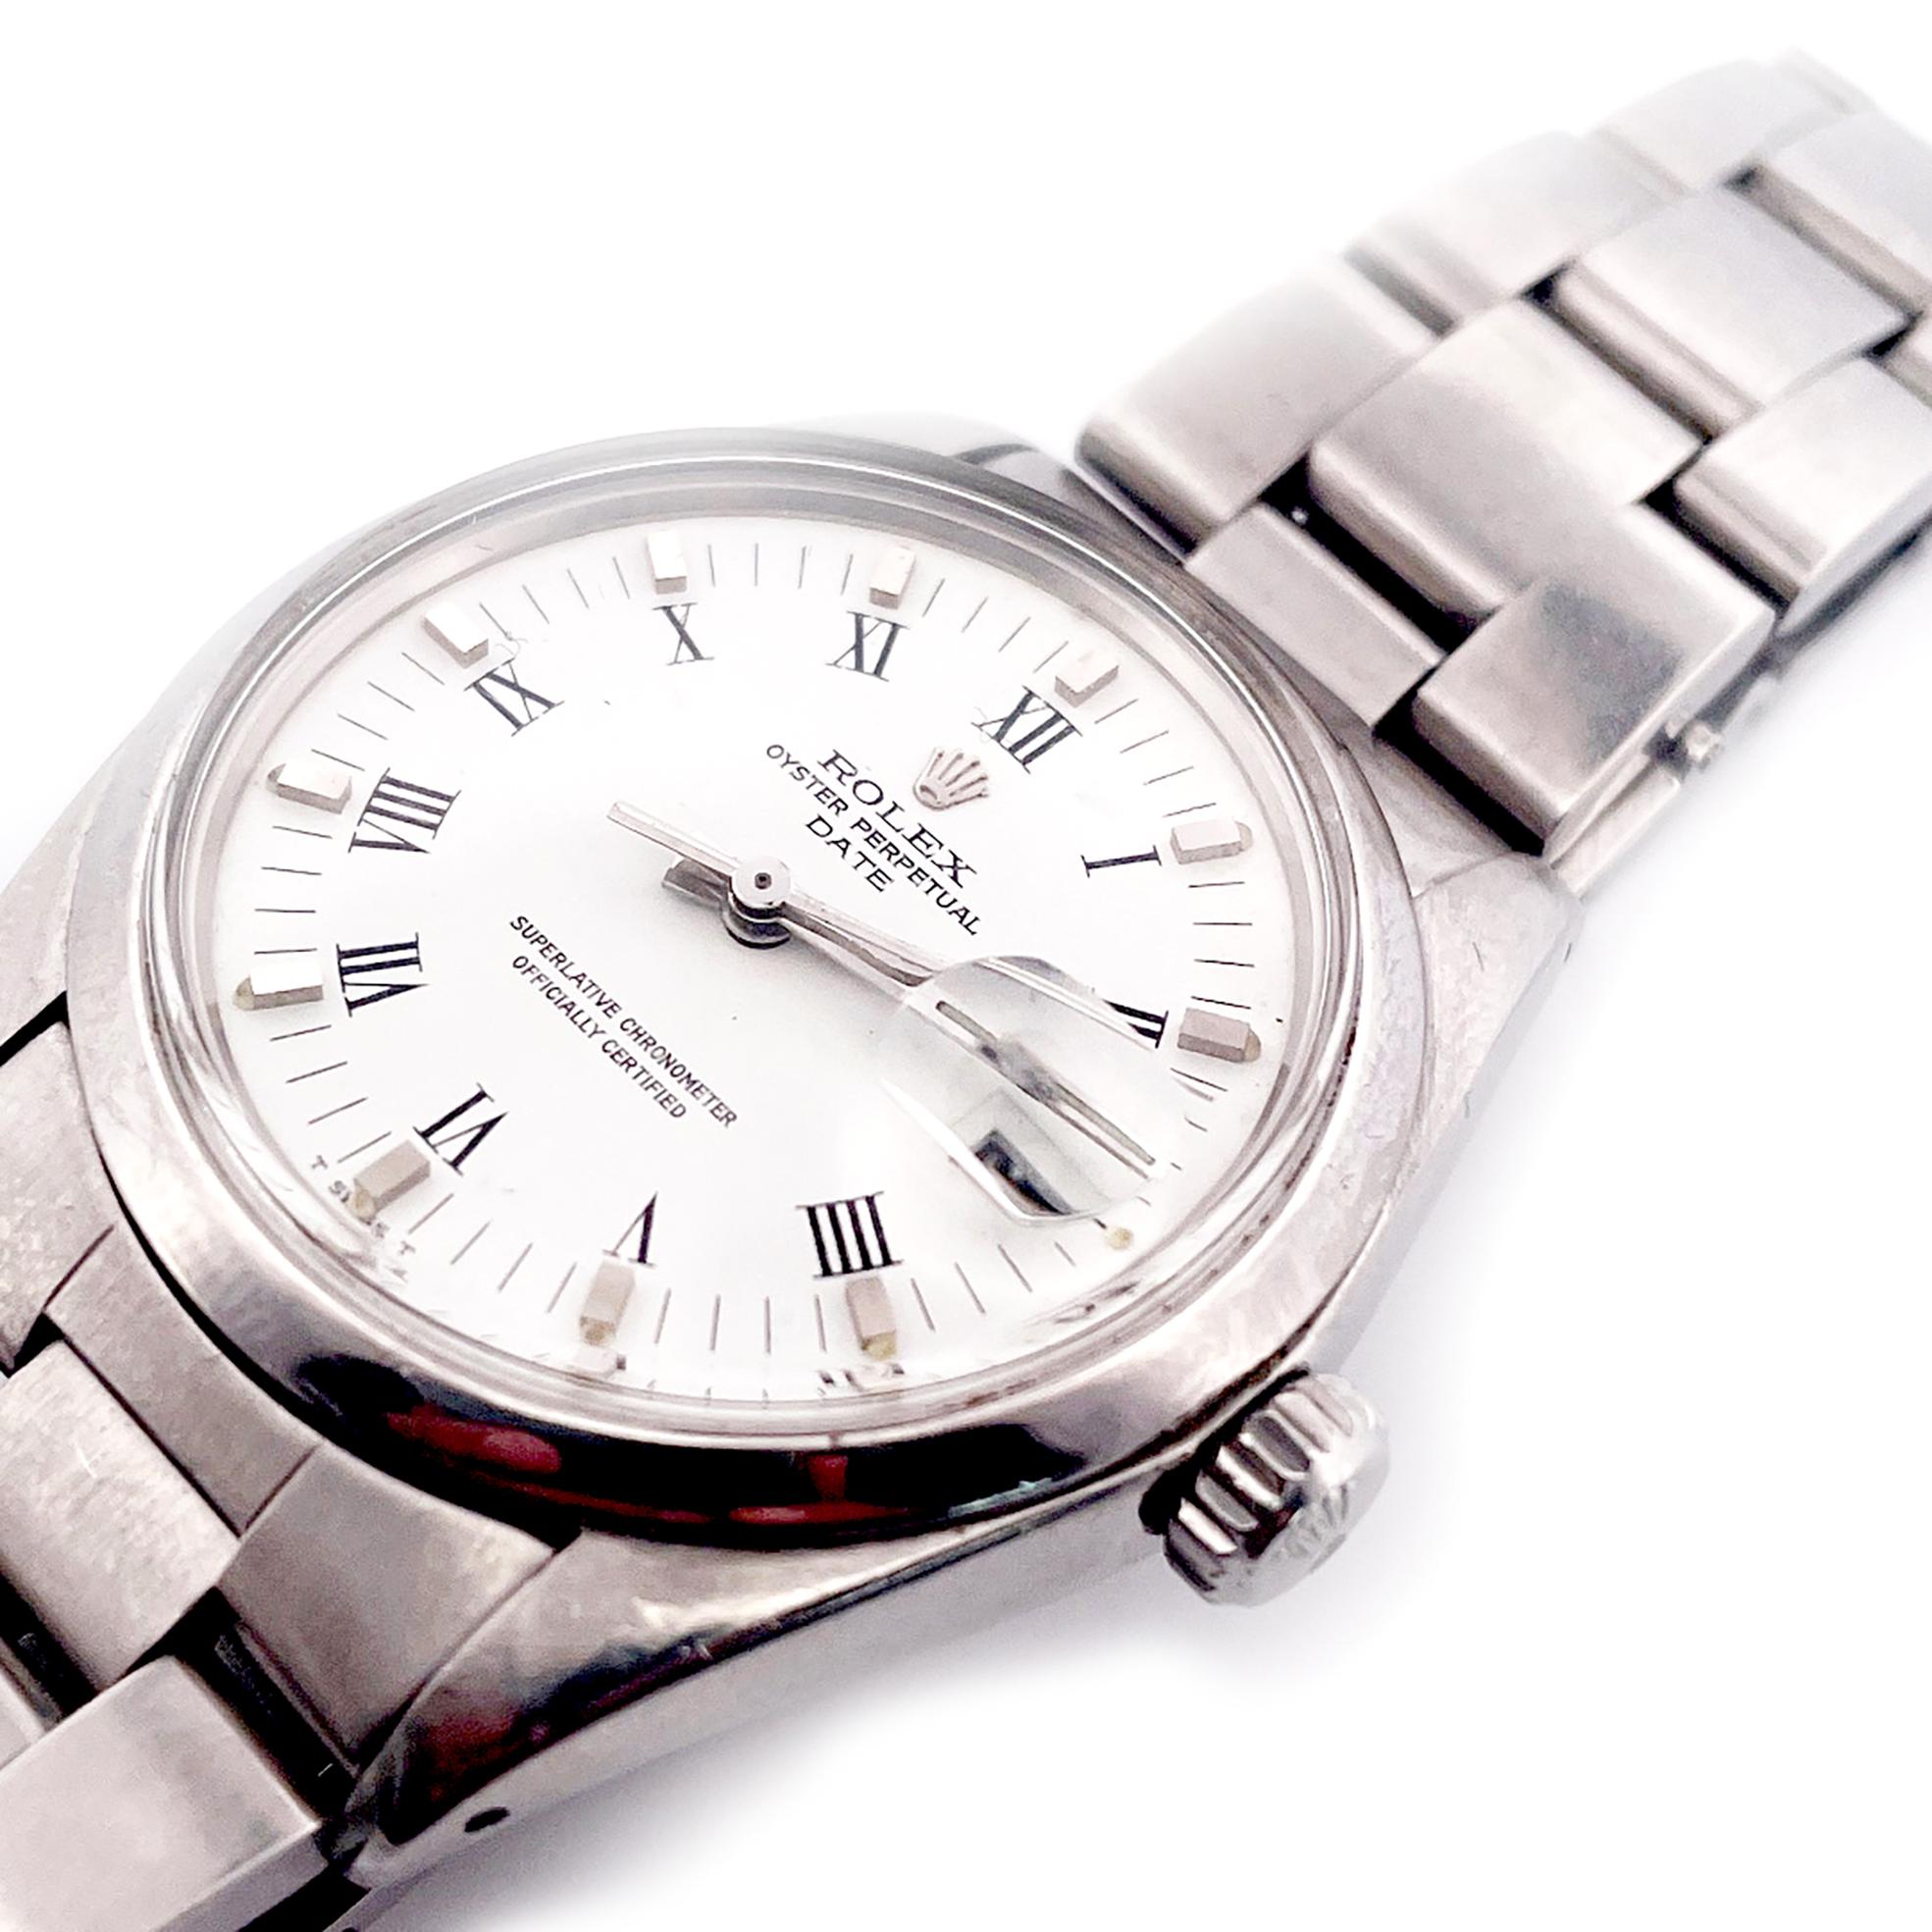 Brand: Rolex
Department: Unisex
Type: STAINLESS
Bezel Color: STANLESS
Dial Color: White
Indices:12-Hour Dial
Style: Dress/Formal
Case Size: 36mm
Features: 12-Hour Dial
This Rolex Oyster Perpetual Date wristwatch features a classic numeral dial